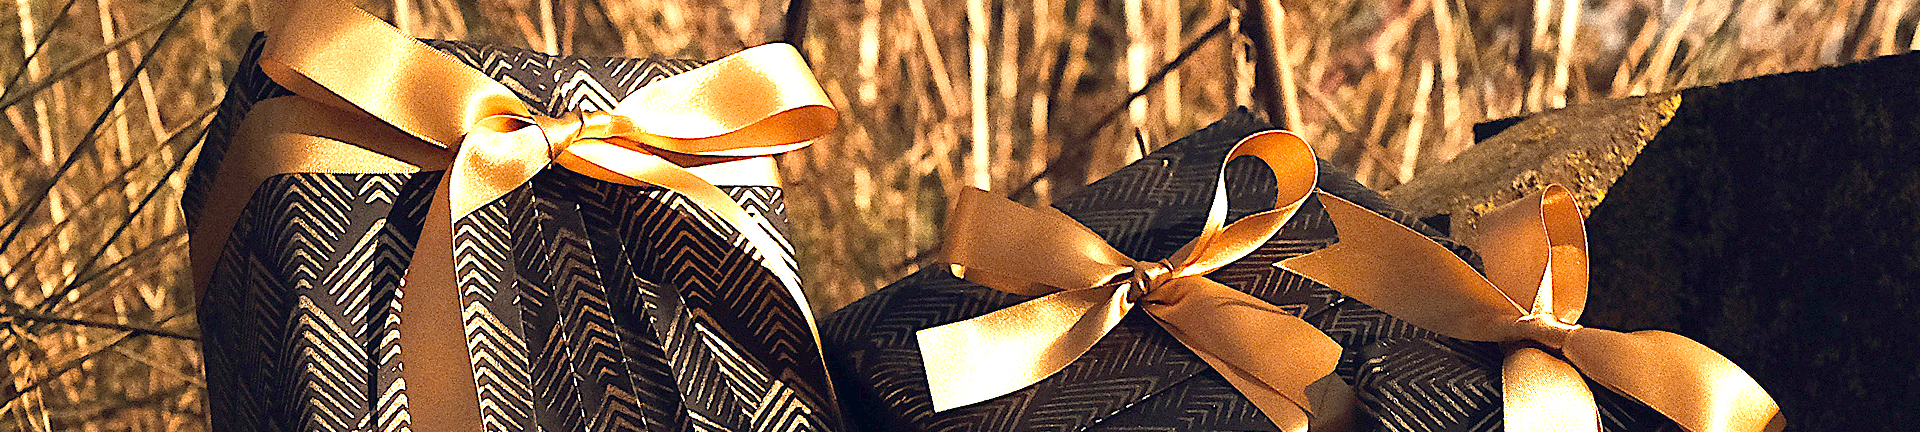 Gifts hand wrapped in black and gold eco-friendly wrapping paper 